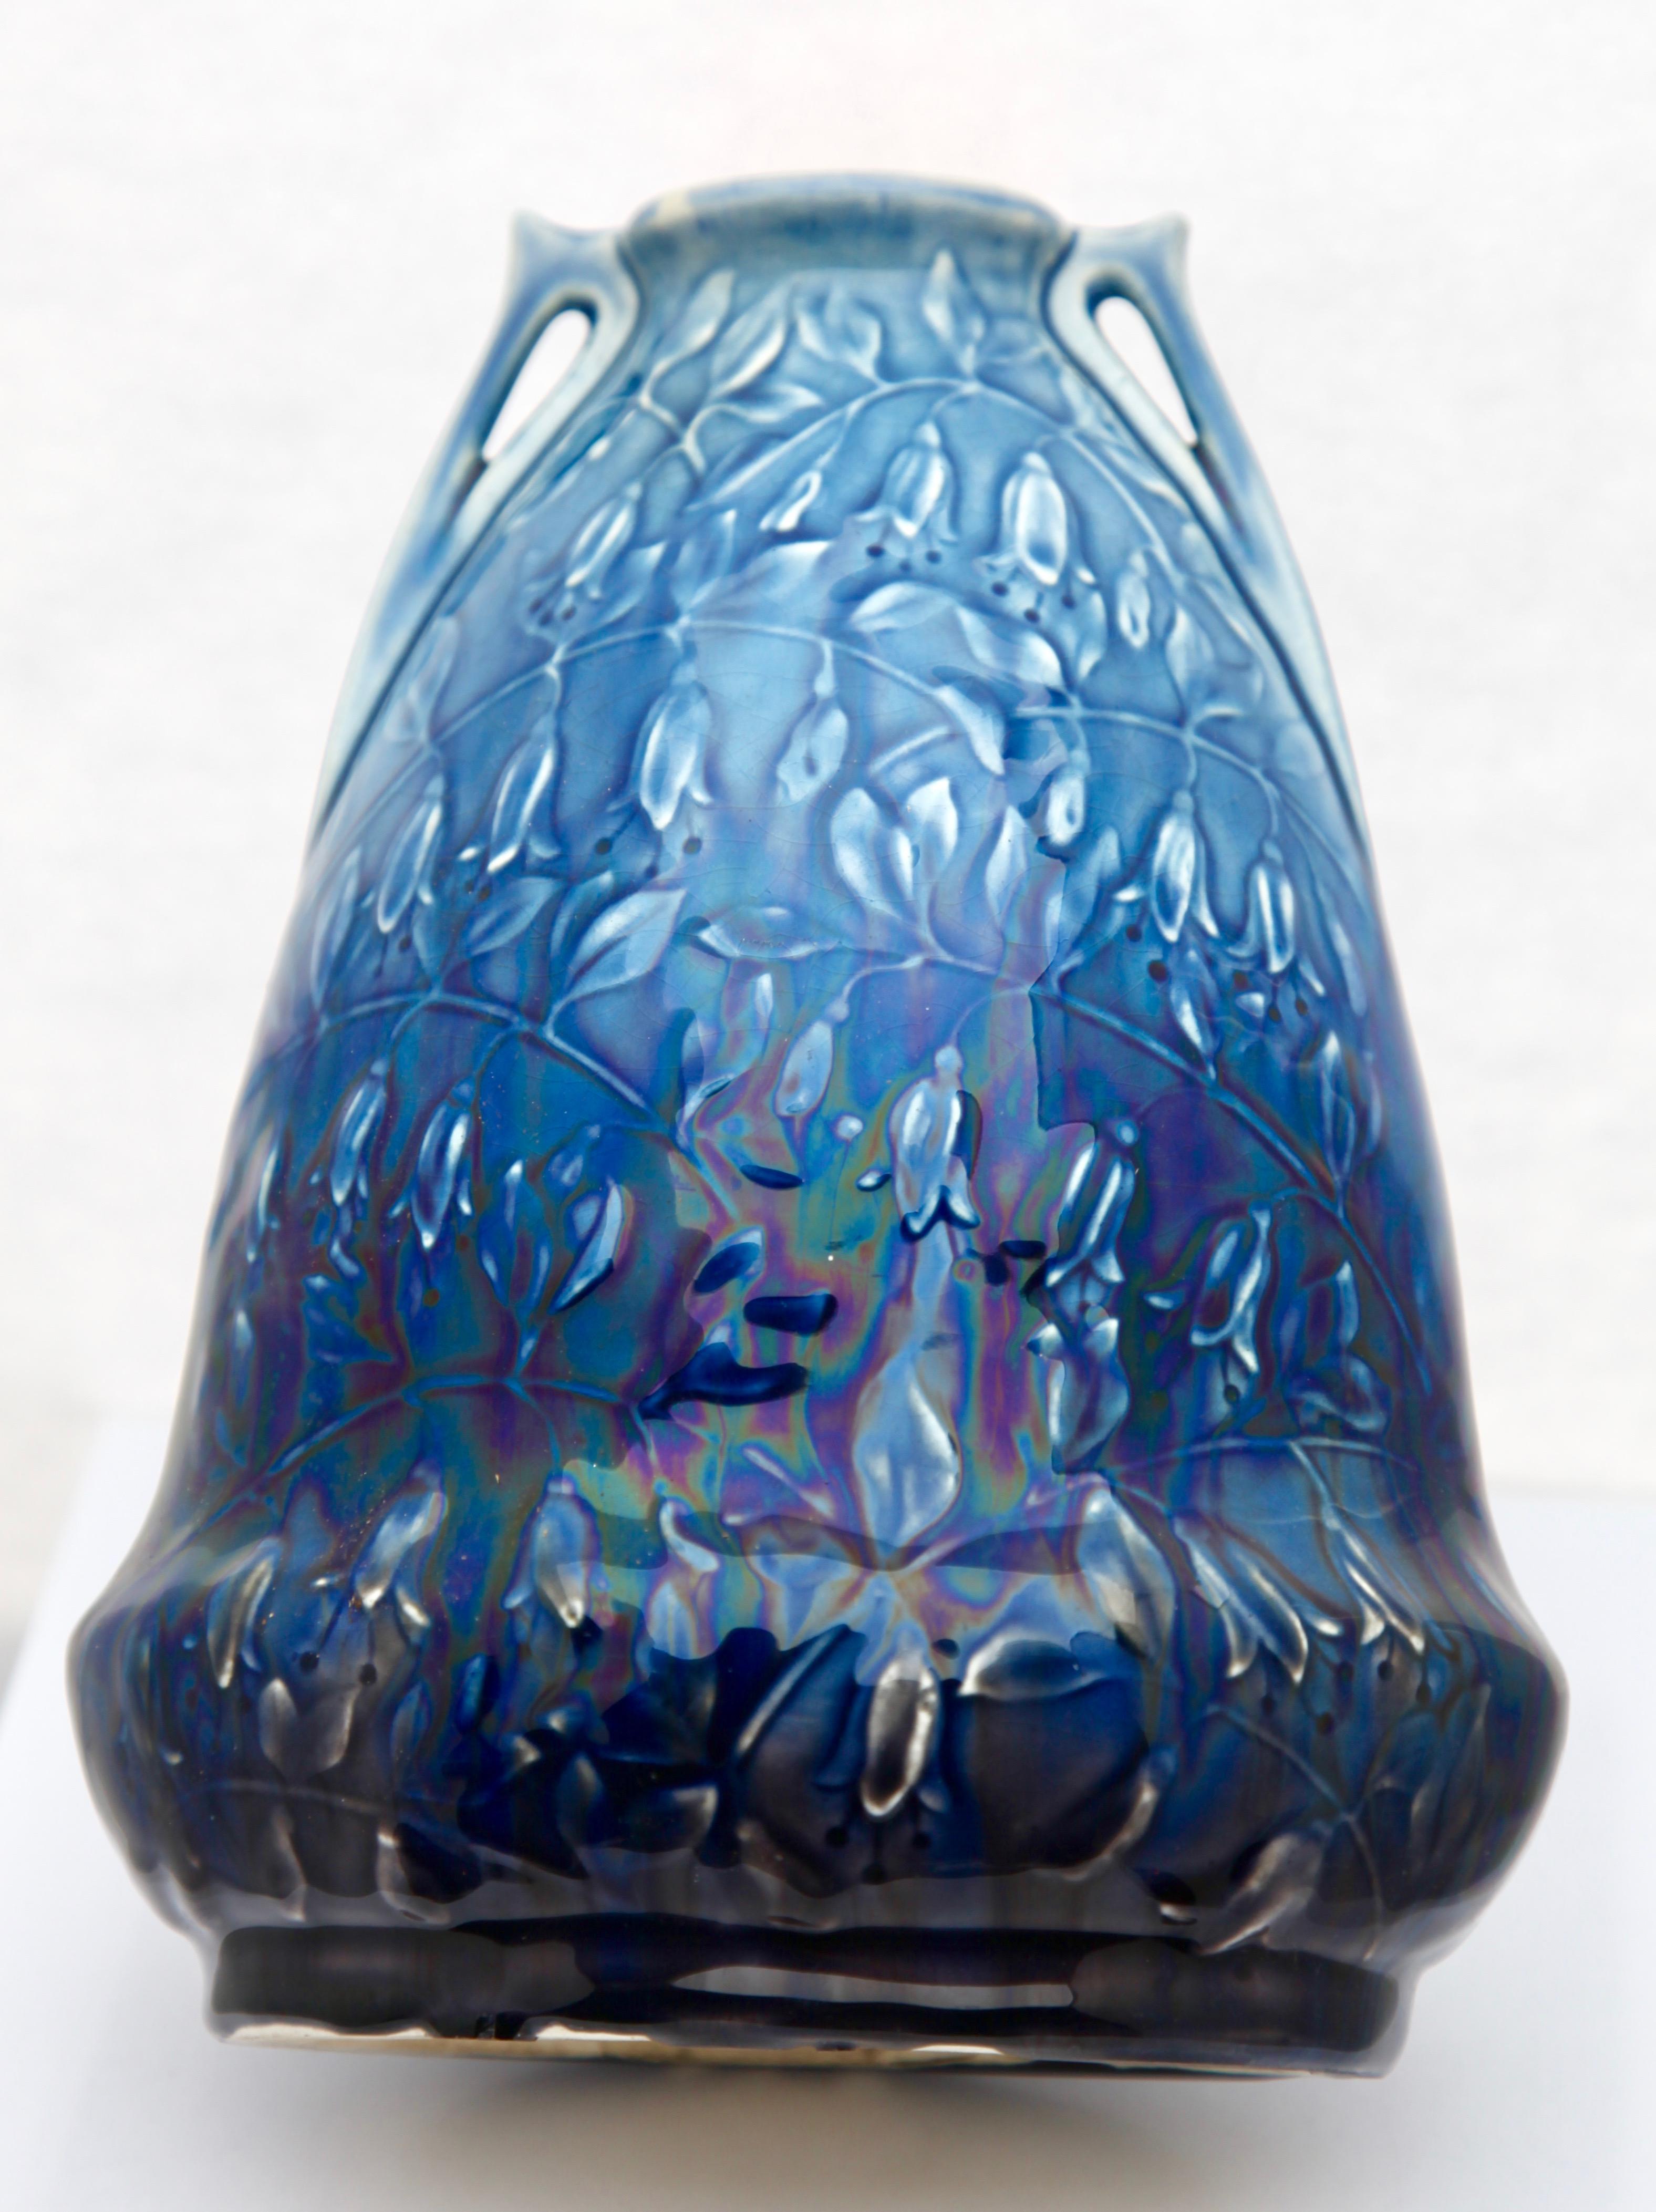 Early 20th Century Art Nouveau AMC, Wasmuel, Floral Decoration Glazed Vase Made in Belgium, 1920s